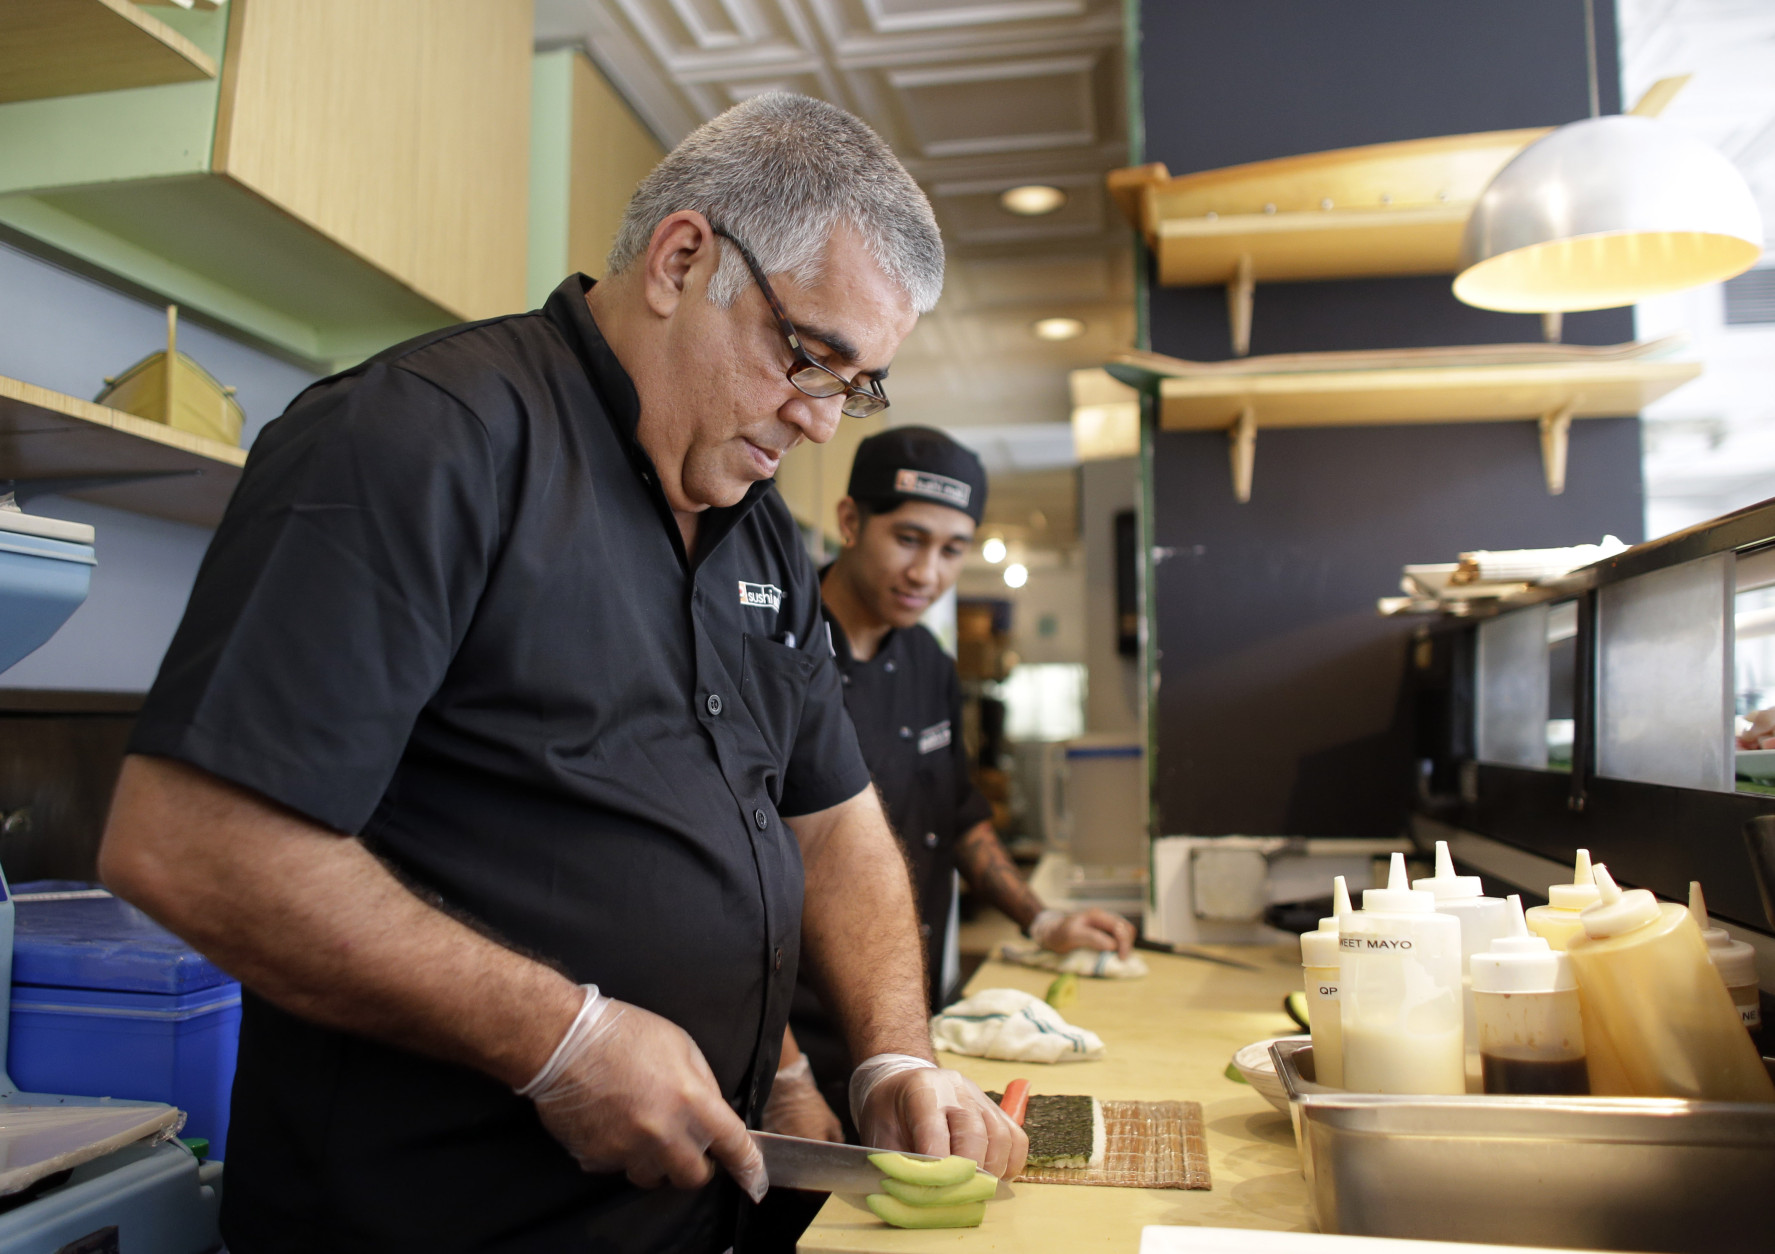 Chef Lucio Alfonso Perez, of Cuba, left, slices avocado for a sushi roll as he works with Kenneth Oliveros, right, at a Sushi Maki restaurant, Wednesday, Aug. 12, 2015, in Miami. Perez is one of four Cuban chefs visiting Miami for the week as part of the chef exchange program being hosted by the Cuba Study Group. The initiative is meant to encourage collaboration and development of new skills. Perez is the chef at Gringo Viejo, which serves traditional Cuban cuisine, and Cuban fusion, in Havana. (AP Photo/Lynne Sladky)